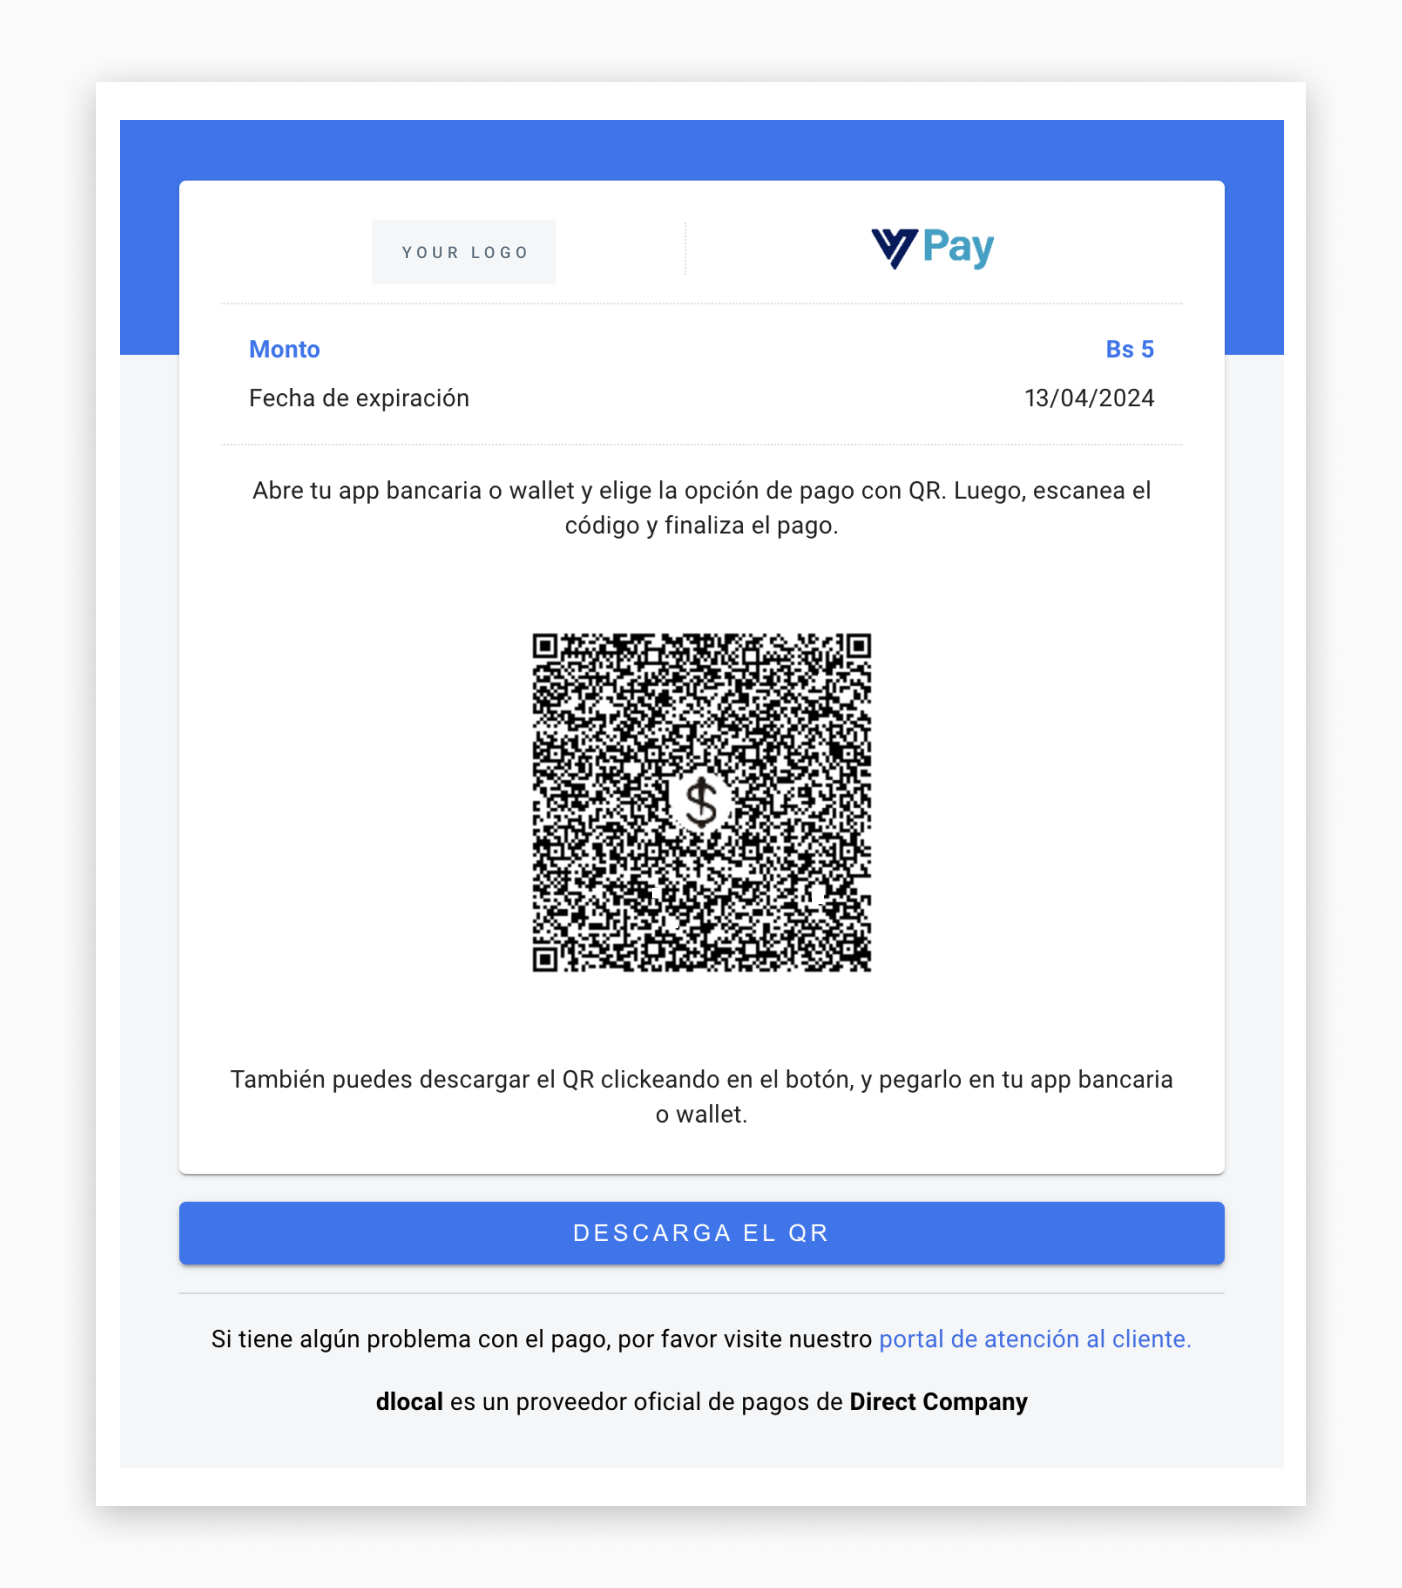 VPay QR UI built with the information in the example above.